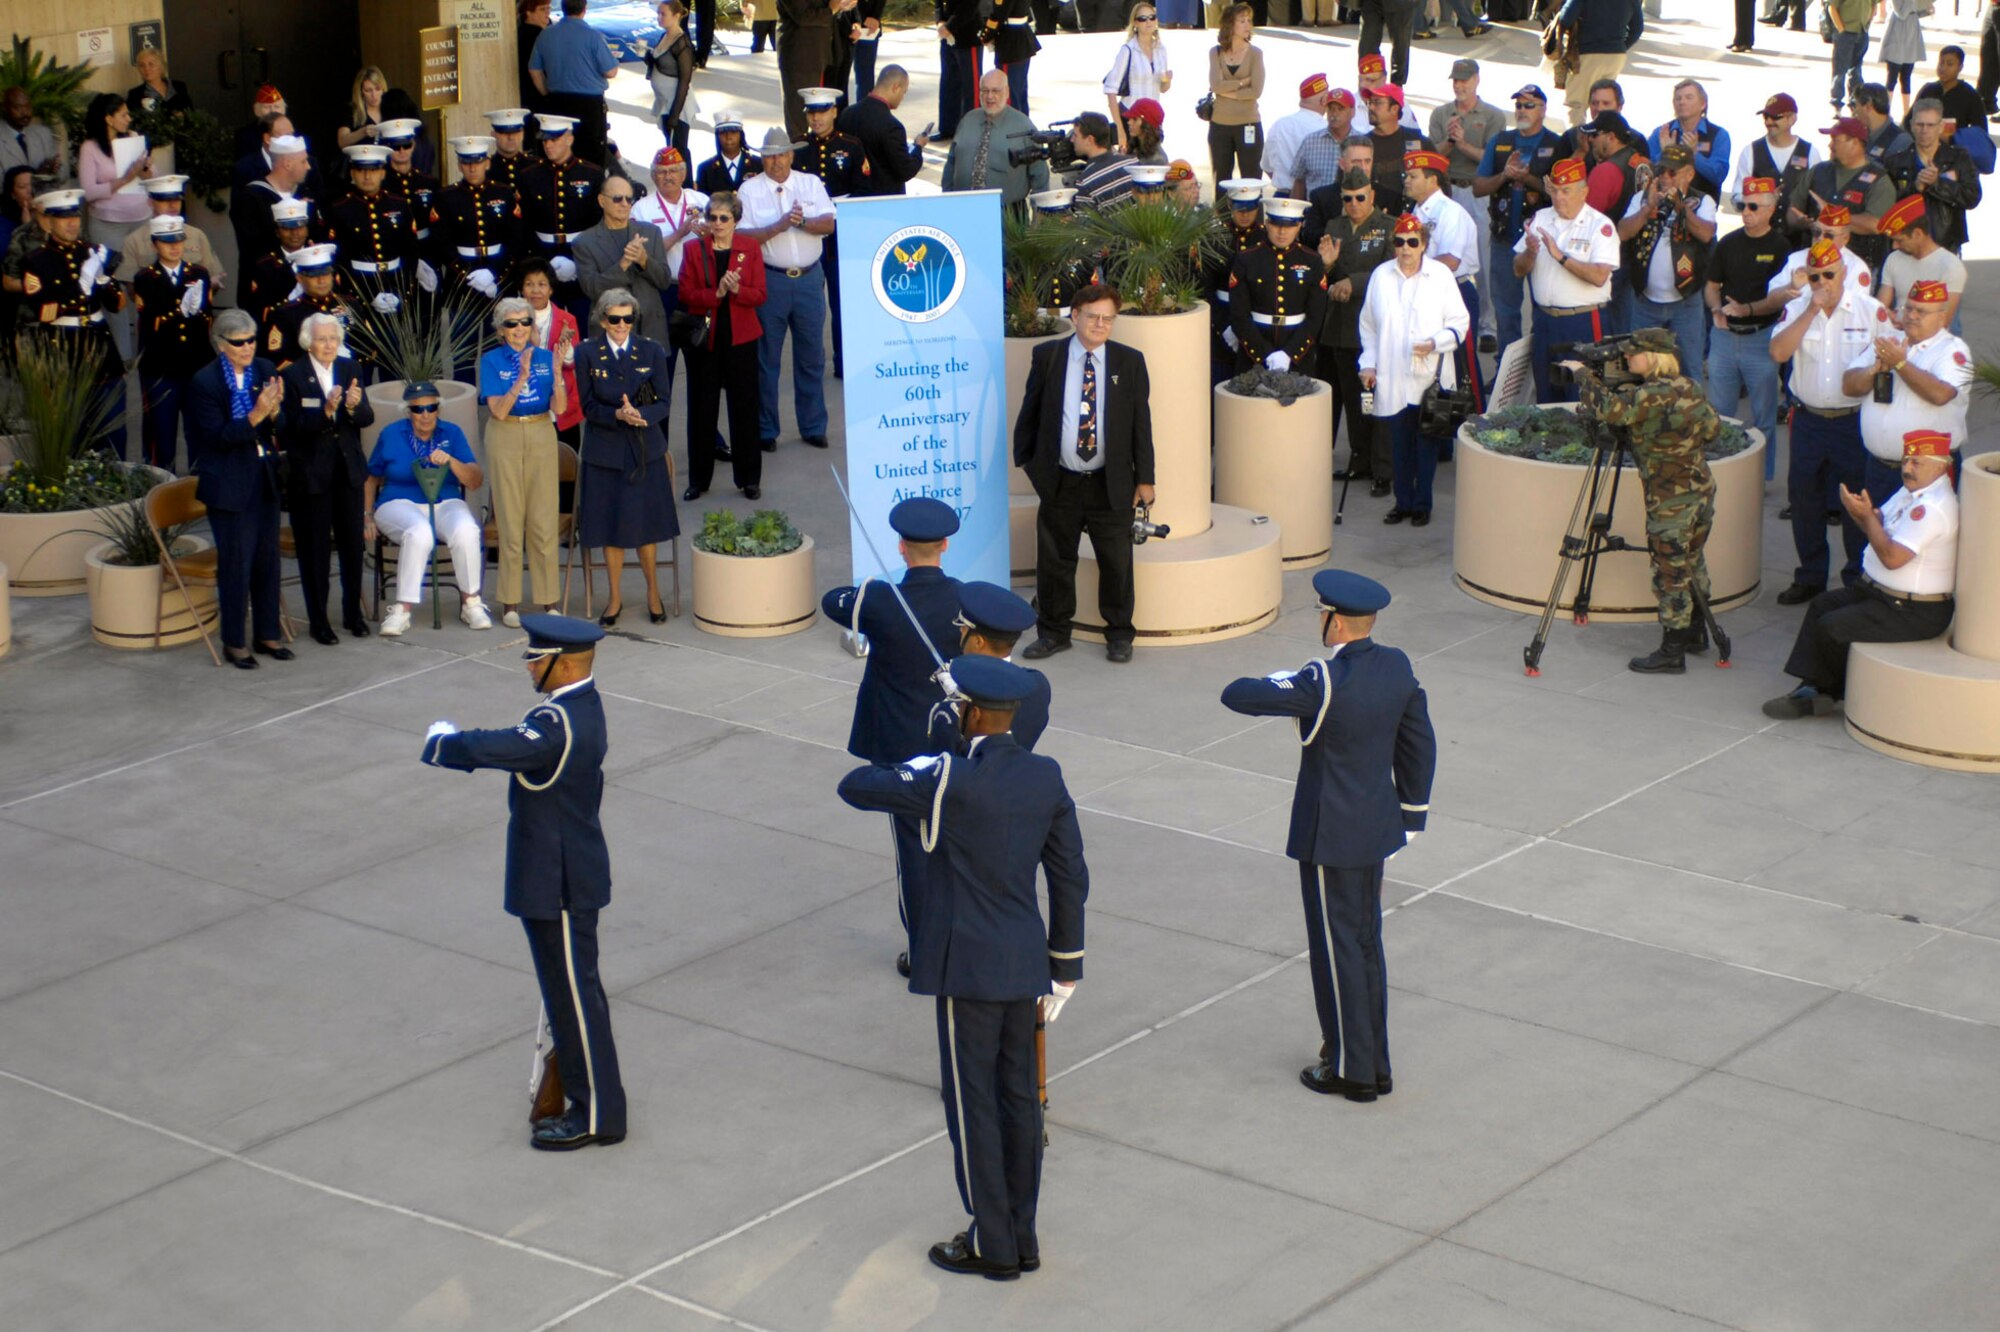 Members of the Air Force Honor Guard provide a rifle drill performance for a crowd outside of the city council chambers Nov. 8 in Las Vegas. Las Vegas Mayor Oscar Goodman held a special council meeting to proclaim Nov. 5 through 11 as Air Force Week in Las Vegas. (U.S. Air Force photo/Staff Sgt. Kenny Kennemer)
